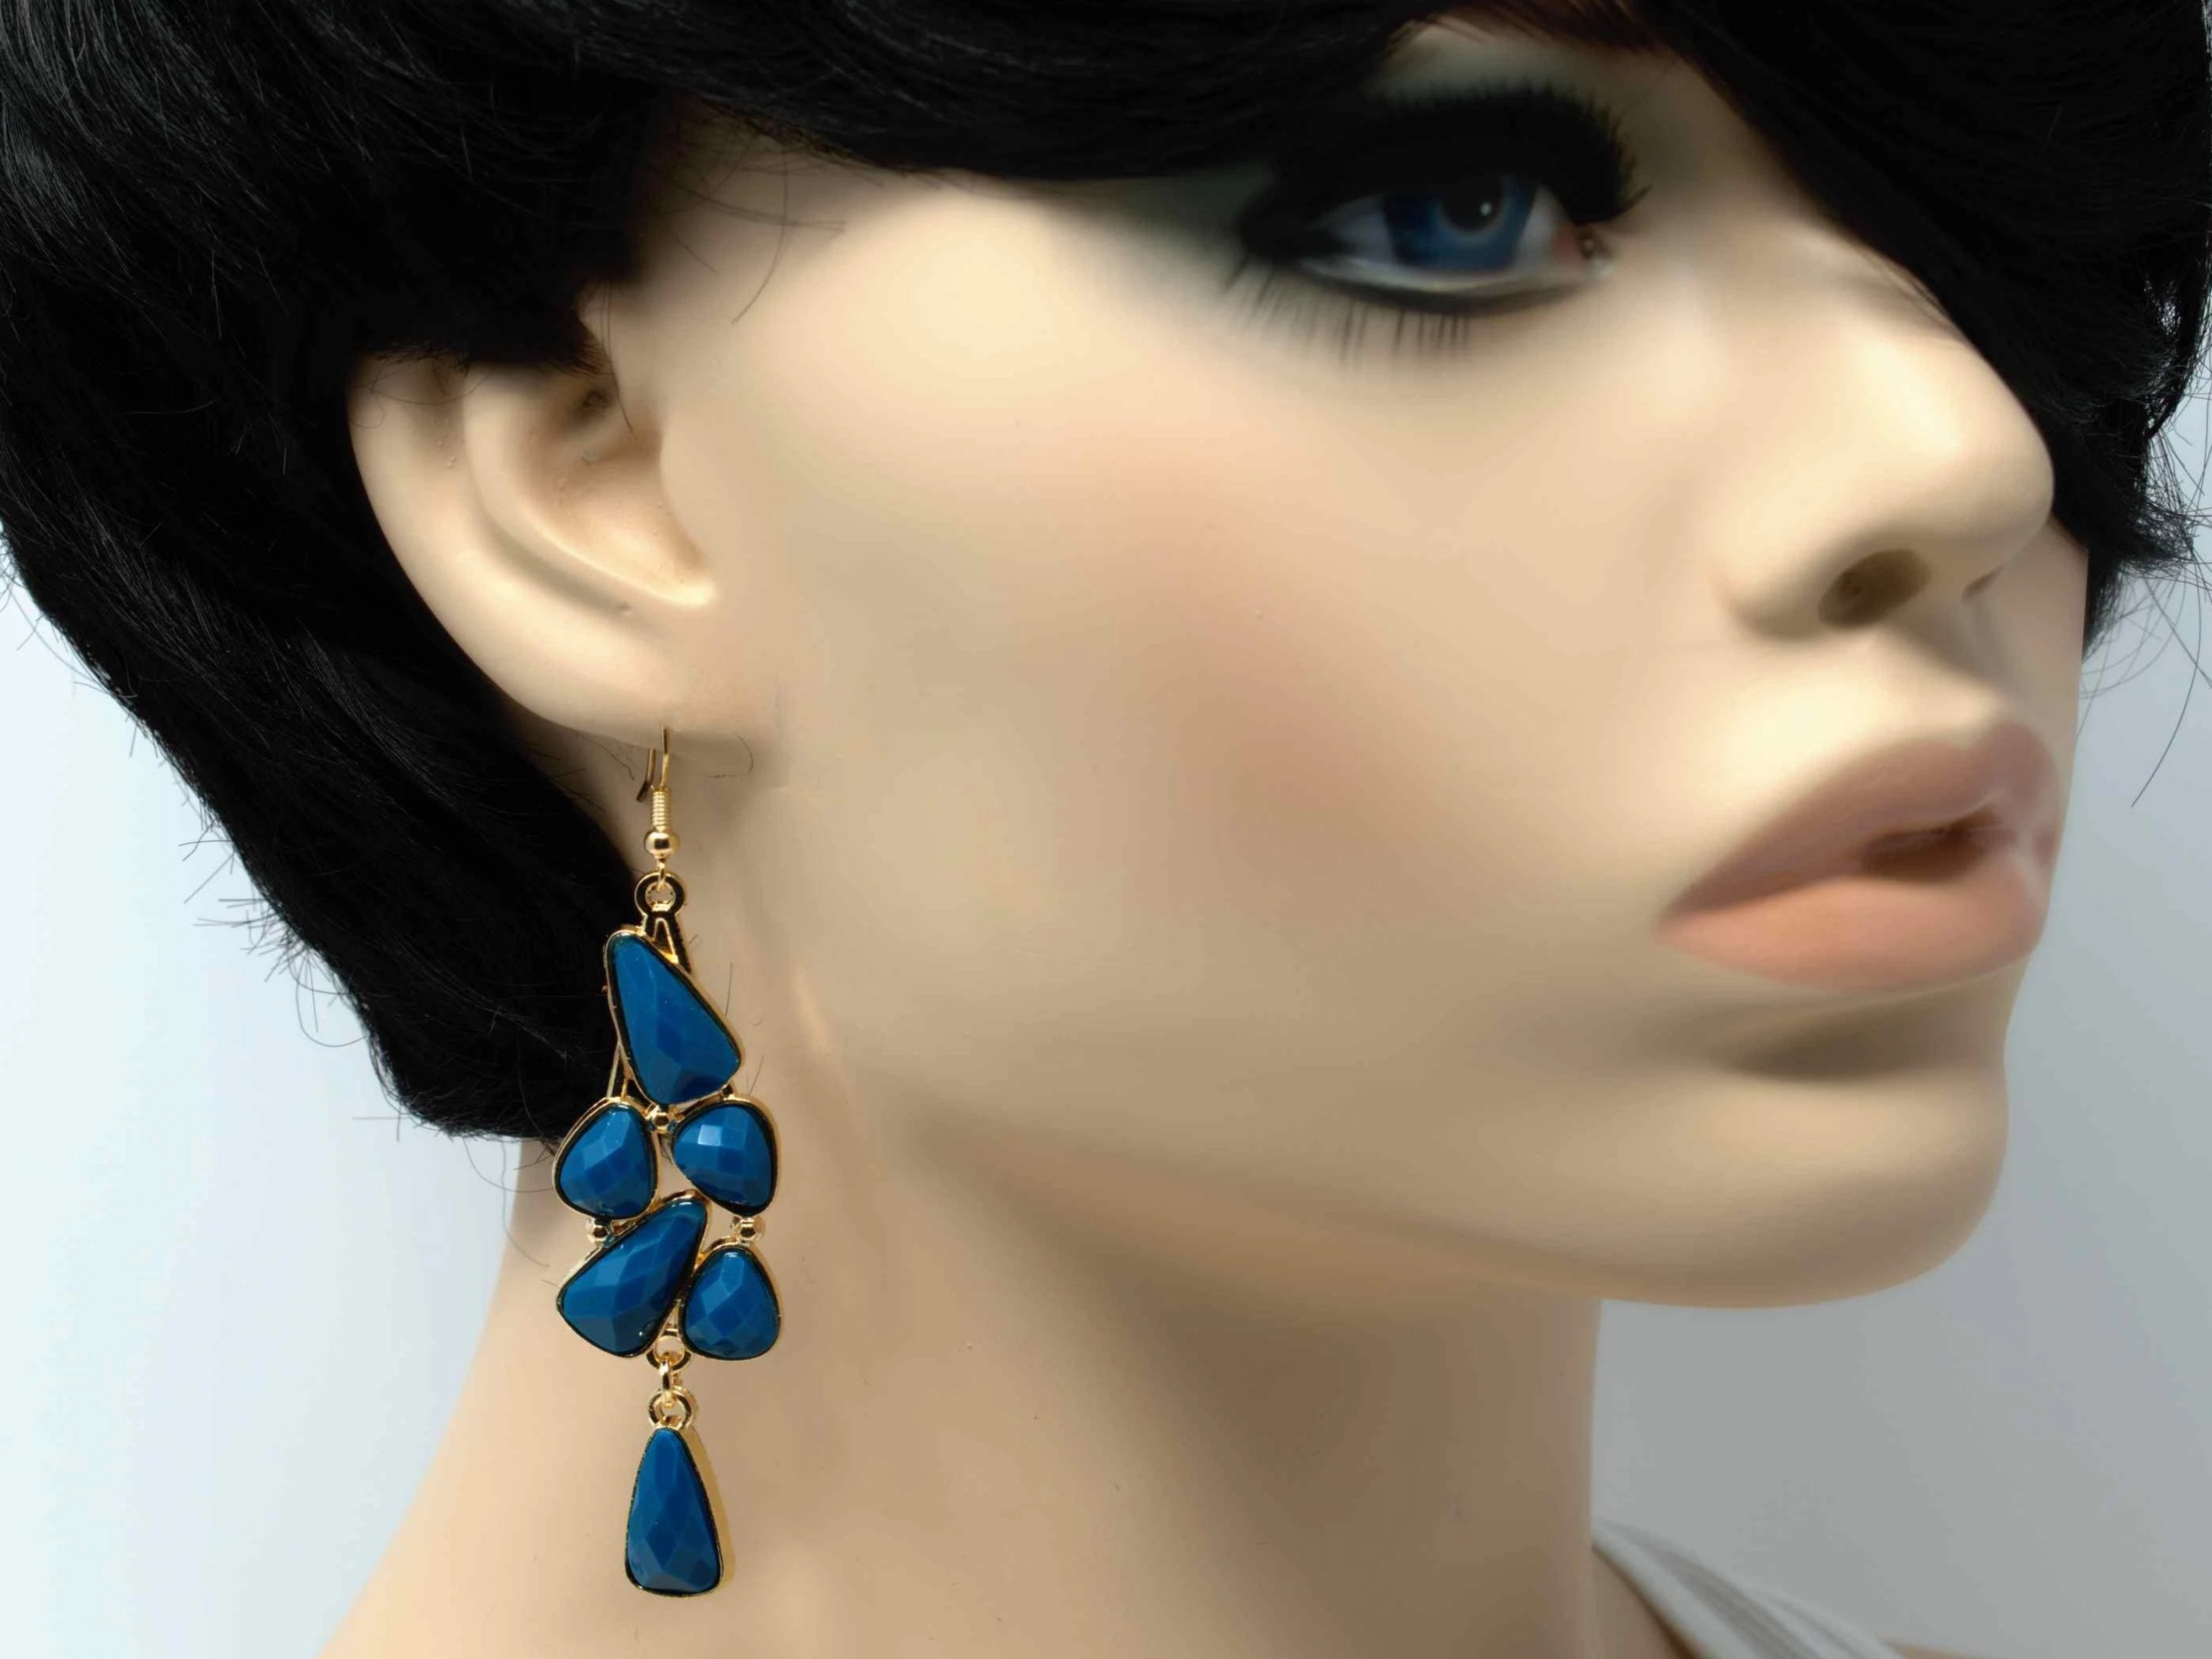 An elegant outstanding gold with turquoise accent stones fashion dangle drop earring. Comes with a fish hook clasp.